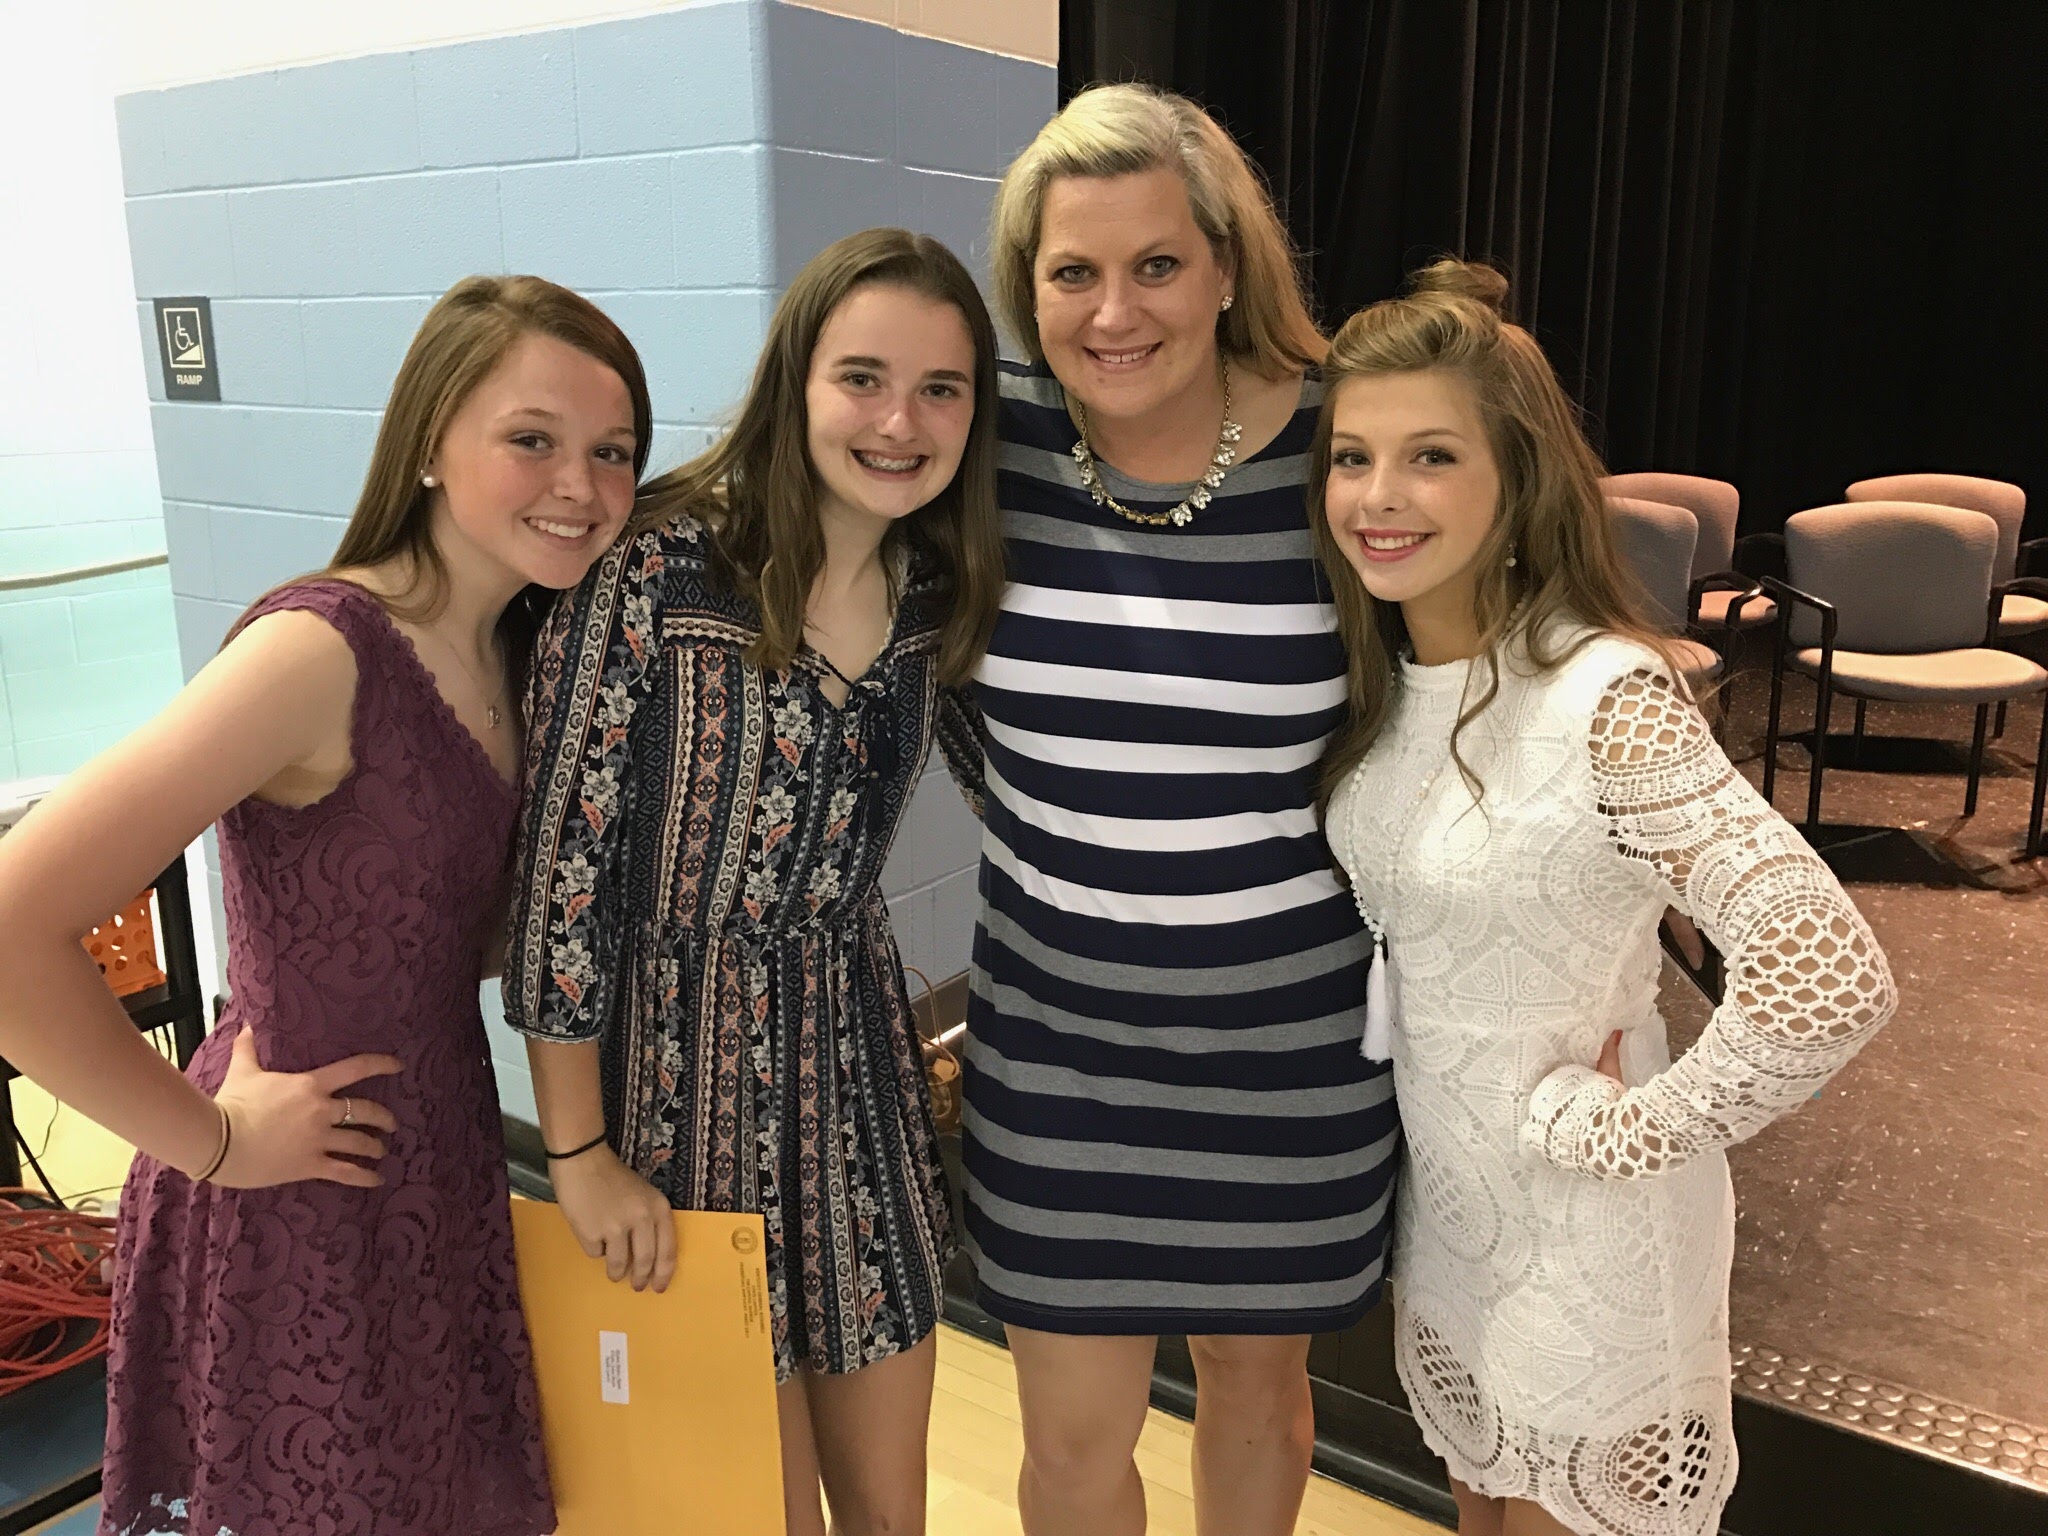 April Deener, Edythe J. Hayes Middle School, Lexington, Kentucky, with some of her students